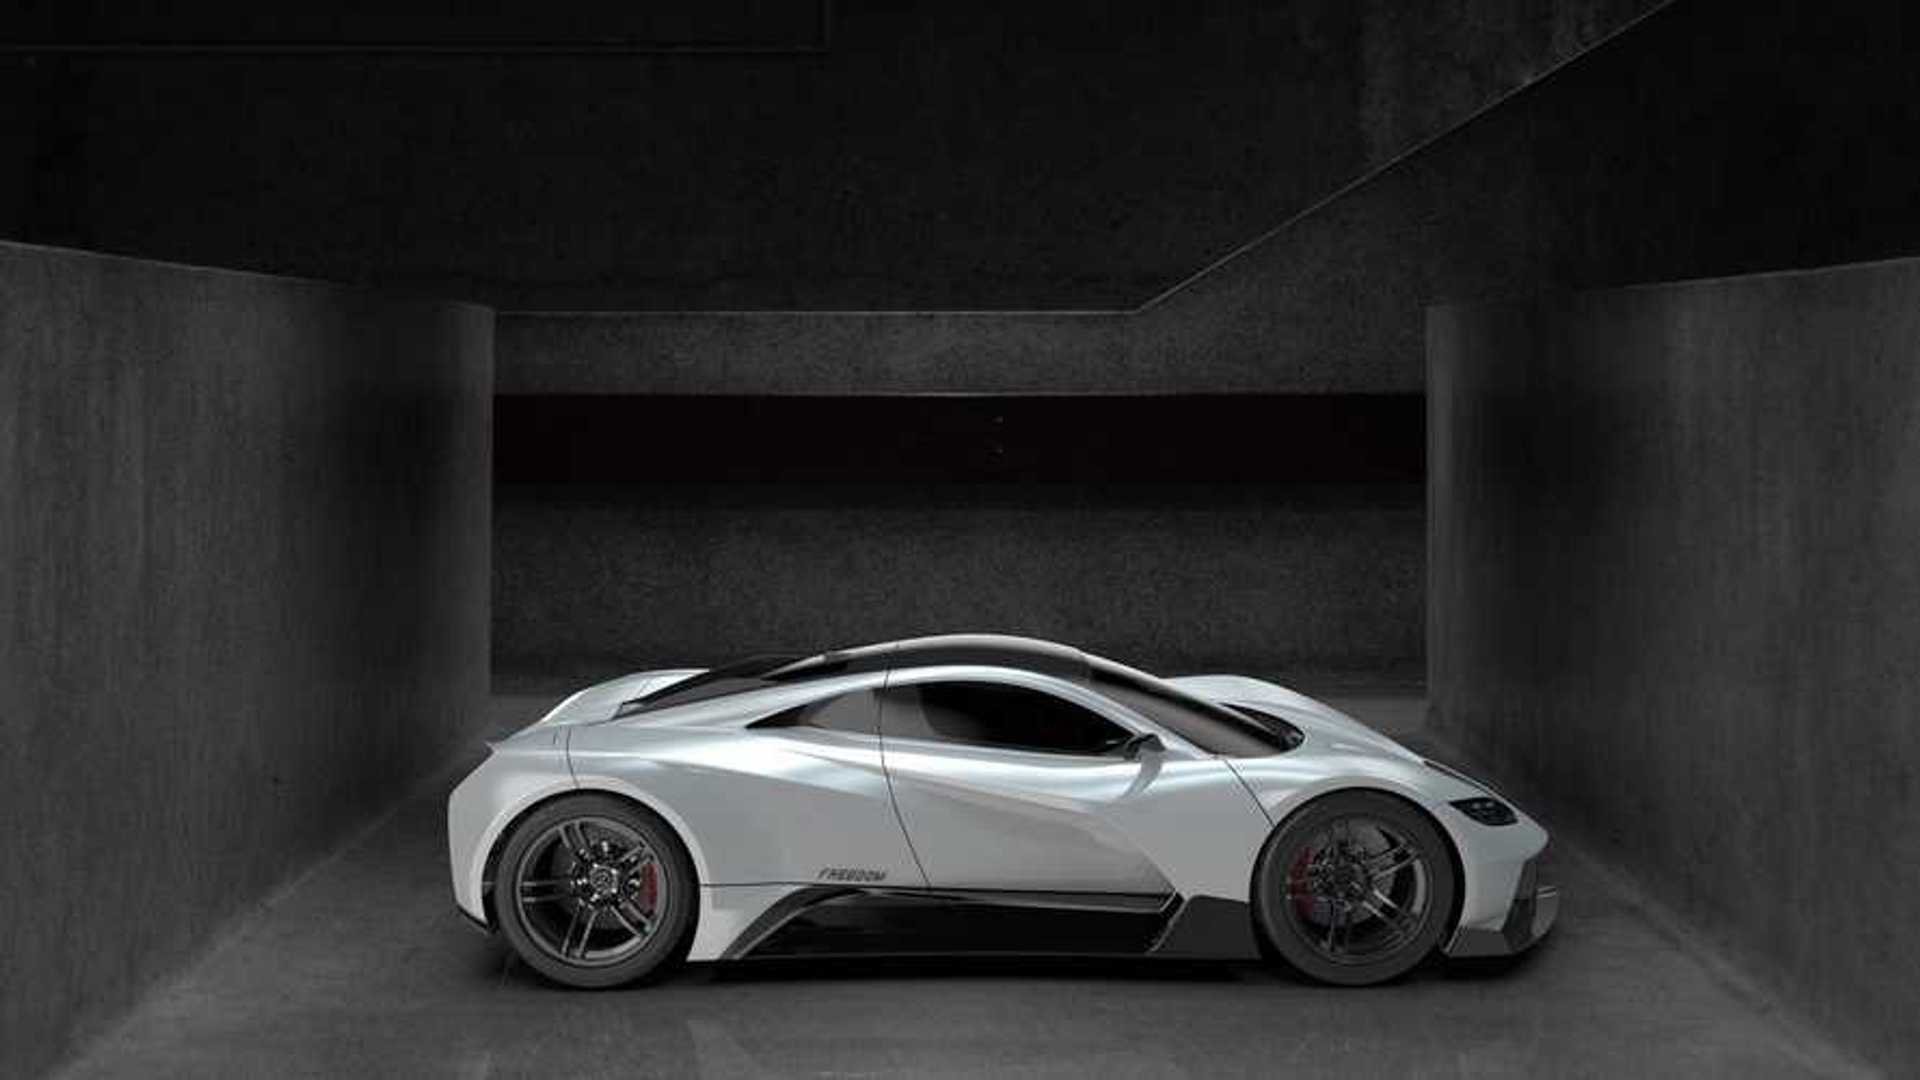 Elation Dogo 001 Hypercar Is A Very Good Boy, Gets First Prototype